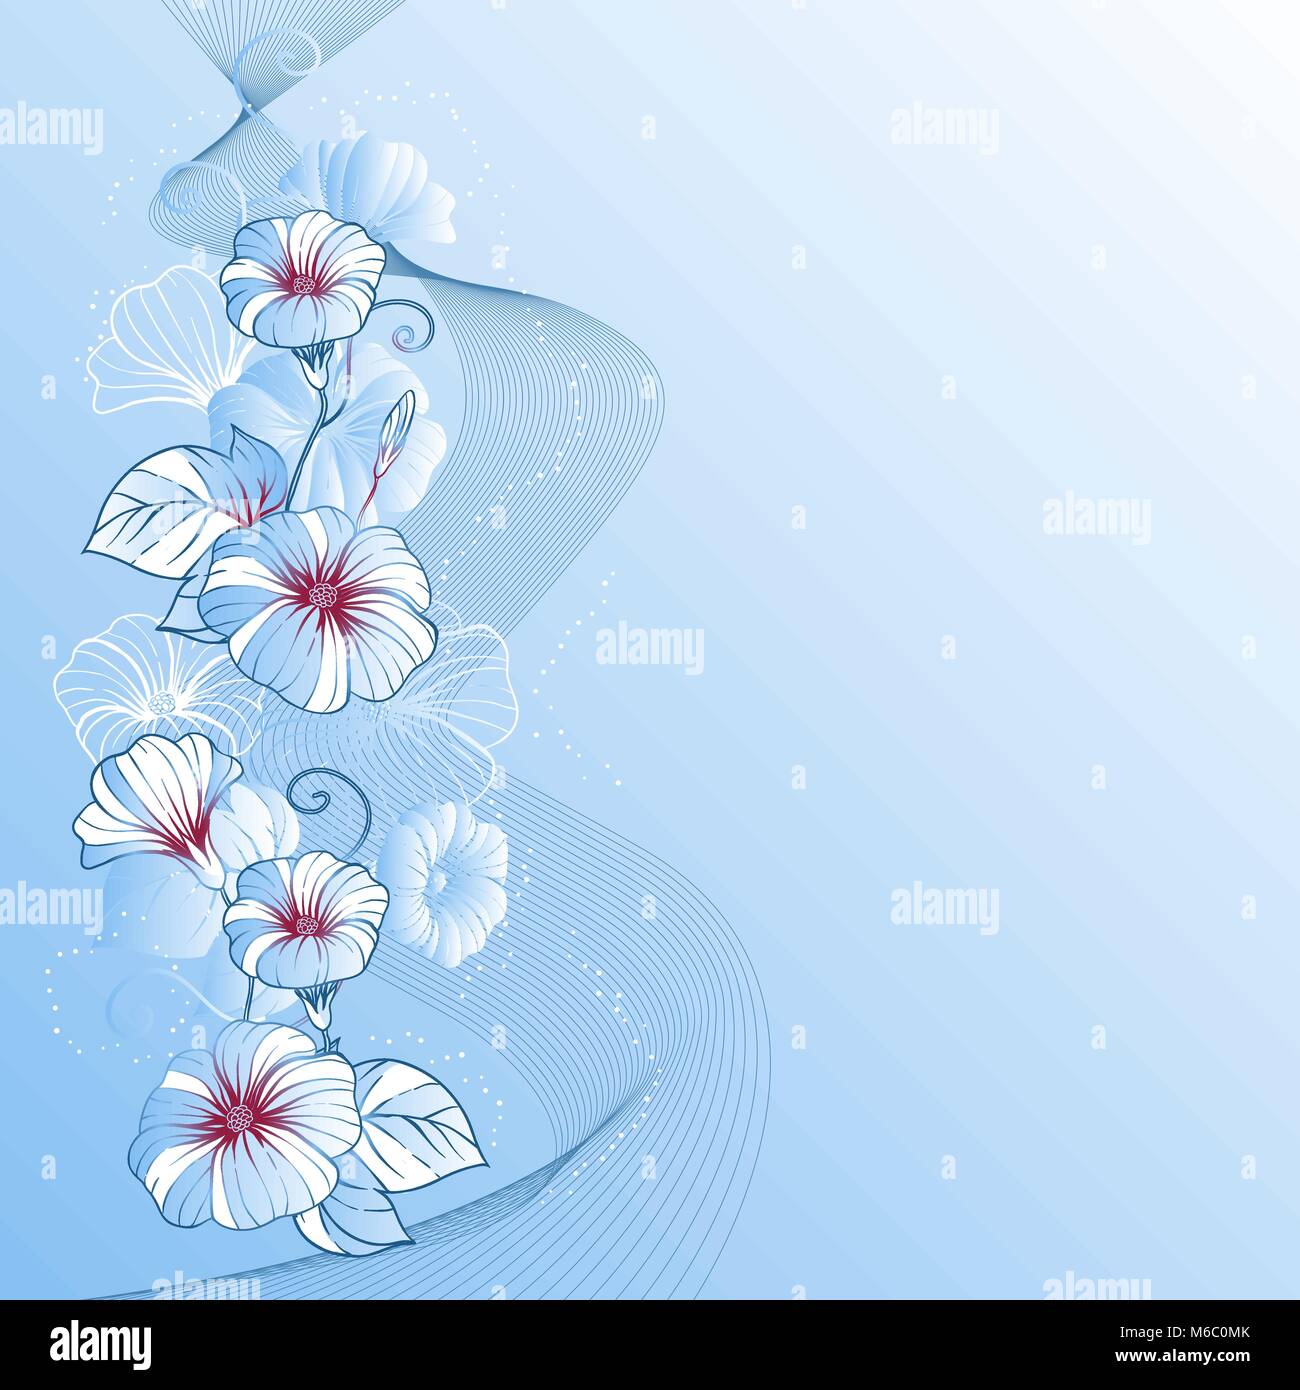 Stylish abstract floral background. Design of vector flowers Stock Vector